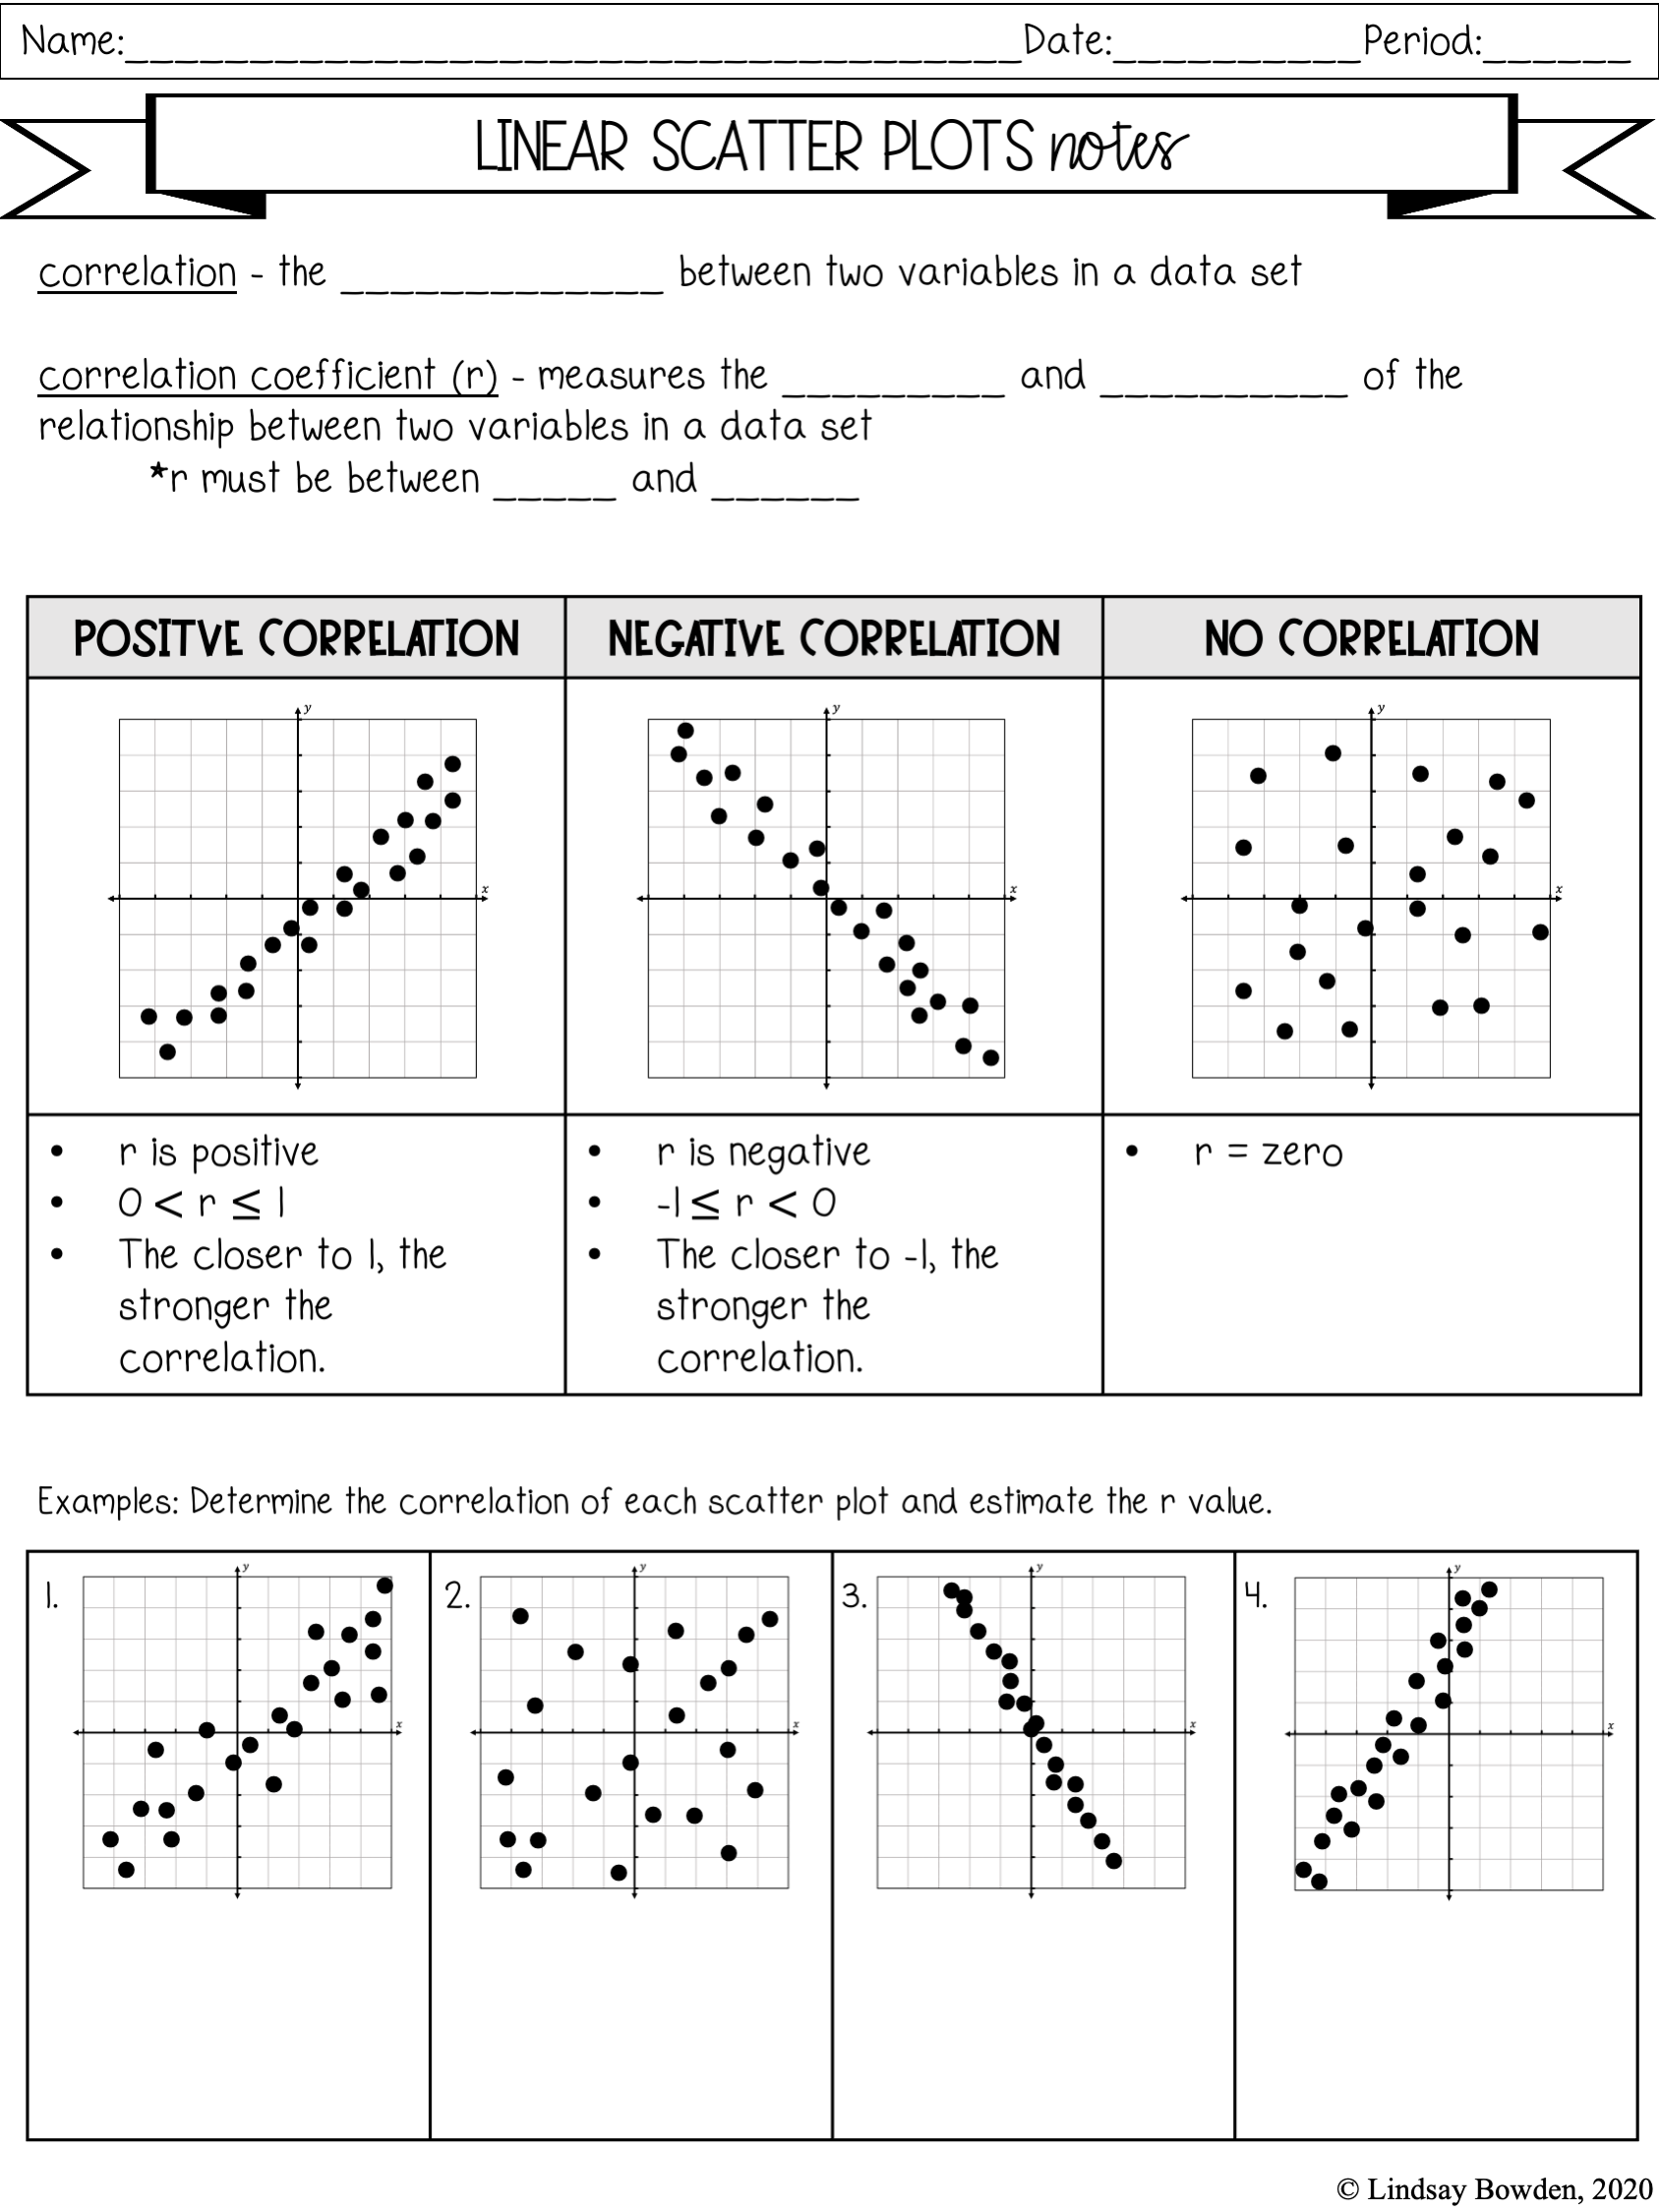 Scatter Plots Notes and Worksheets - Lindsay Bowden Pertaining To Correlation Vs Causation Worksheet